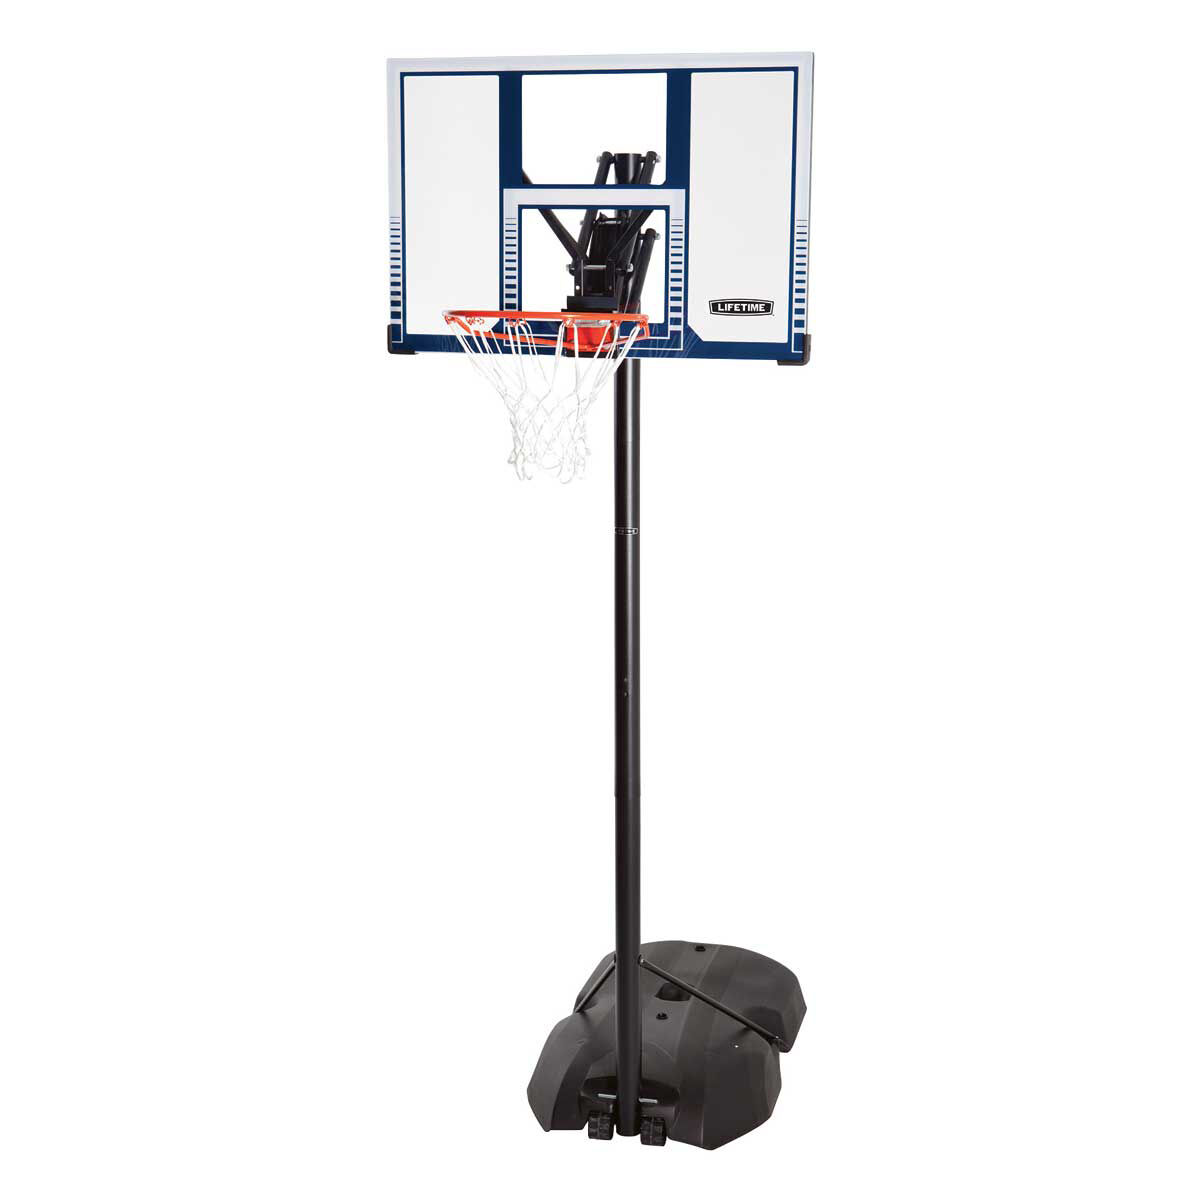 Portable Sports Basketball Hoop Backboard System Stand Height Adjustable for Outdoor Kids Teenager Youth Boys Teens Playing Basketball Ejoyous Basketball Hoop 